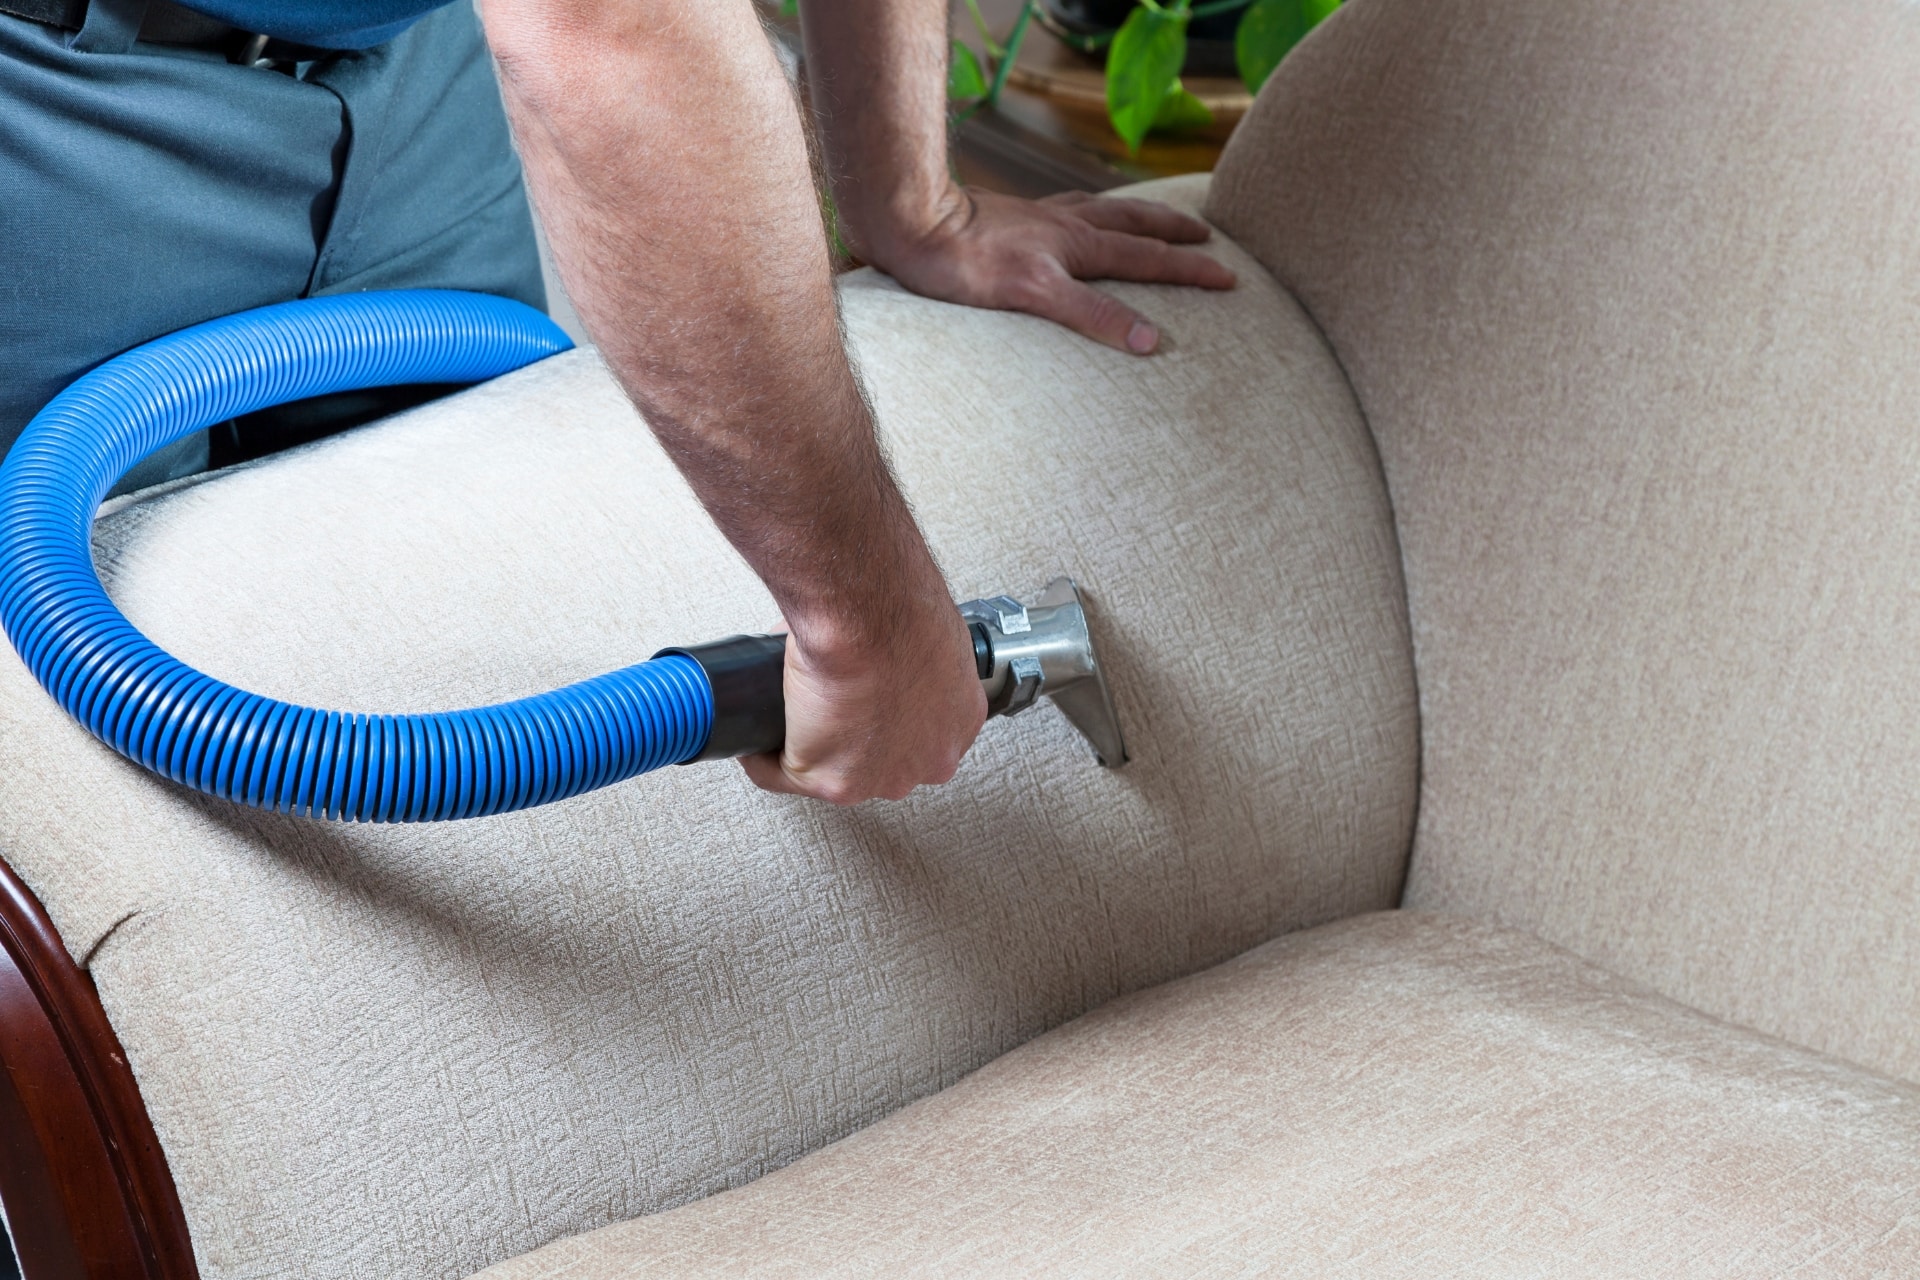 Professional Upholstery Cleaning in Lincoln, NE